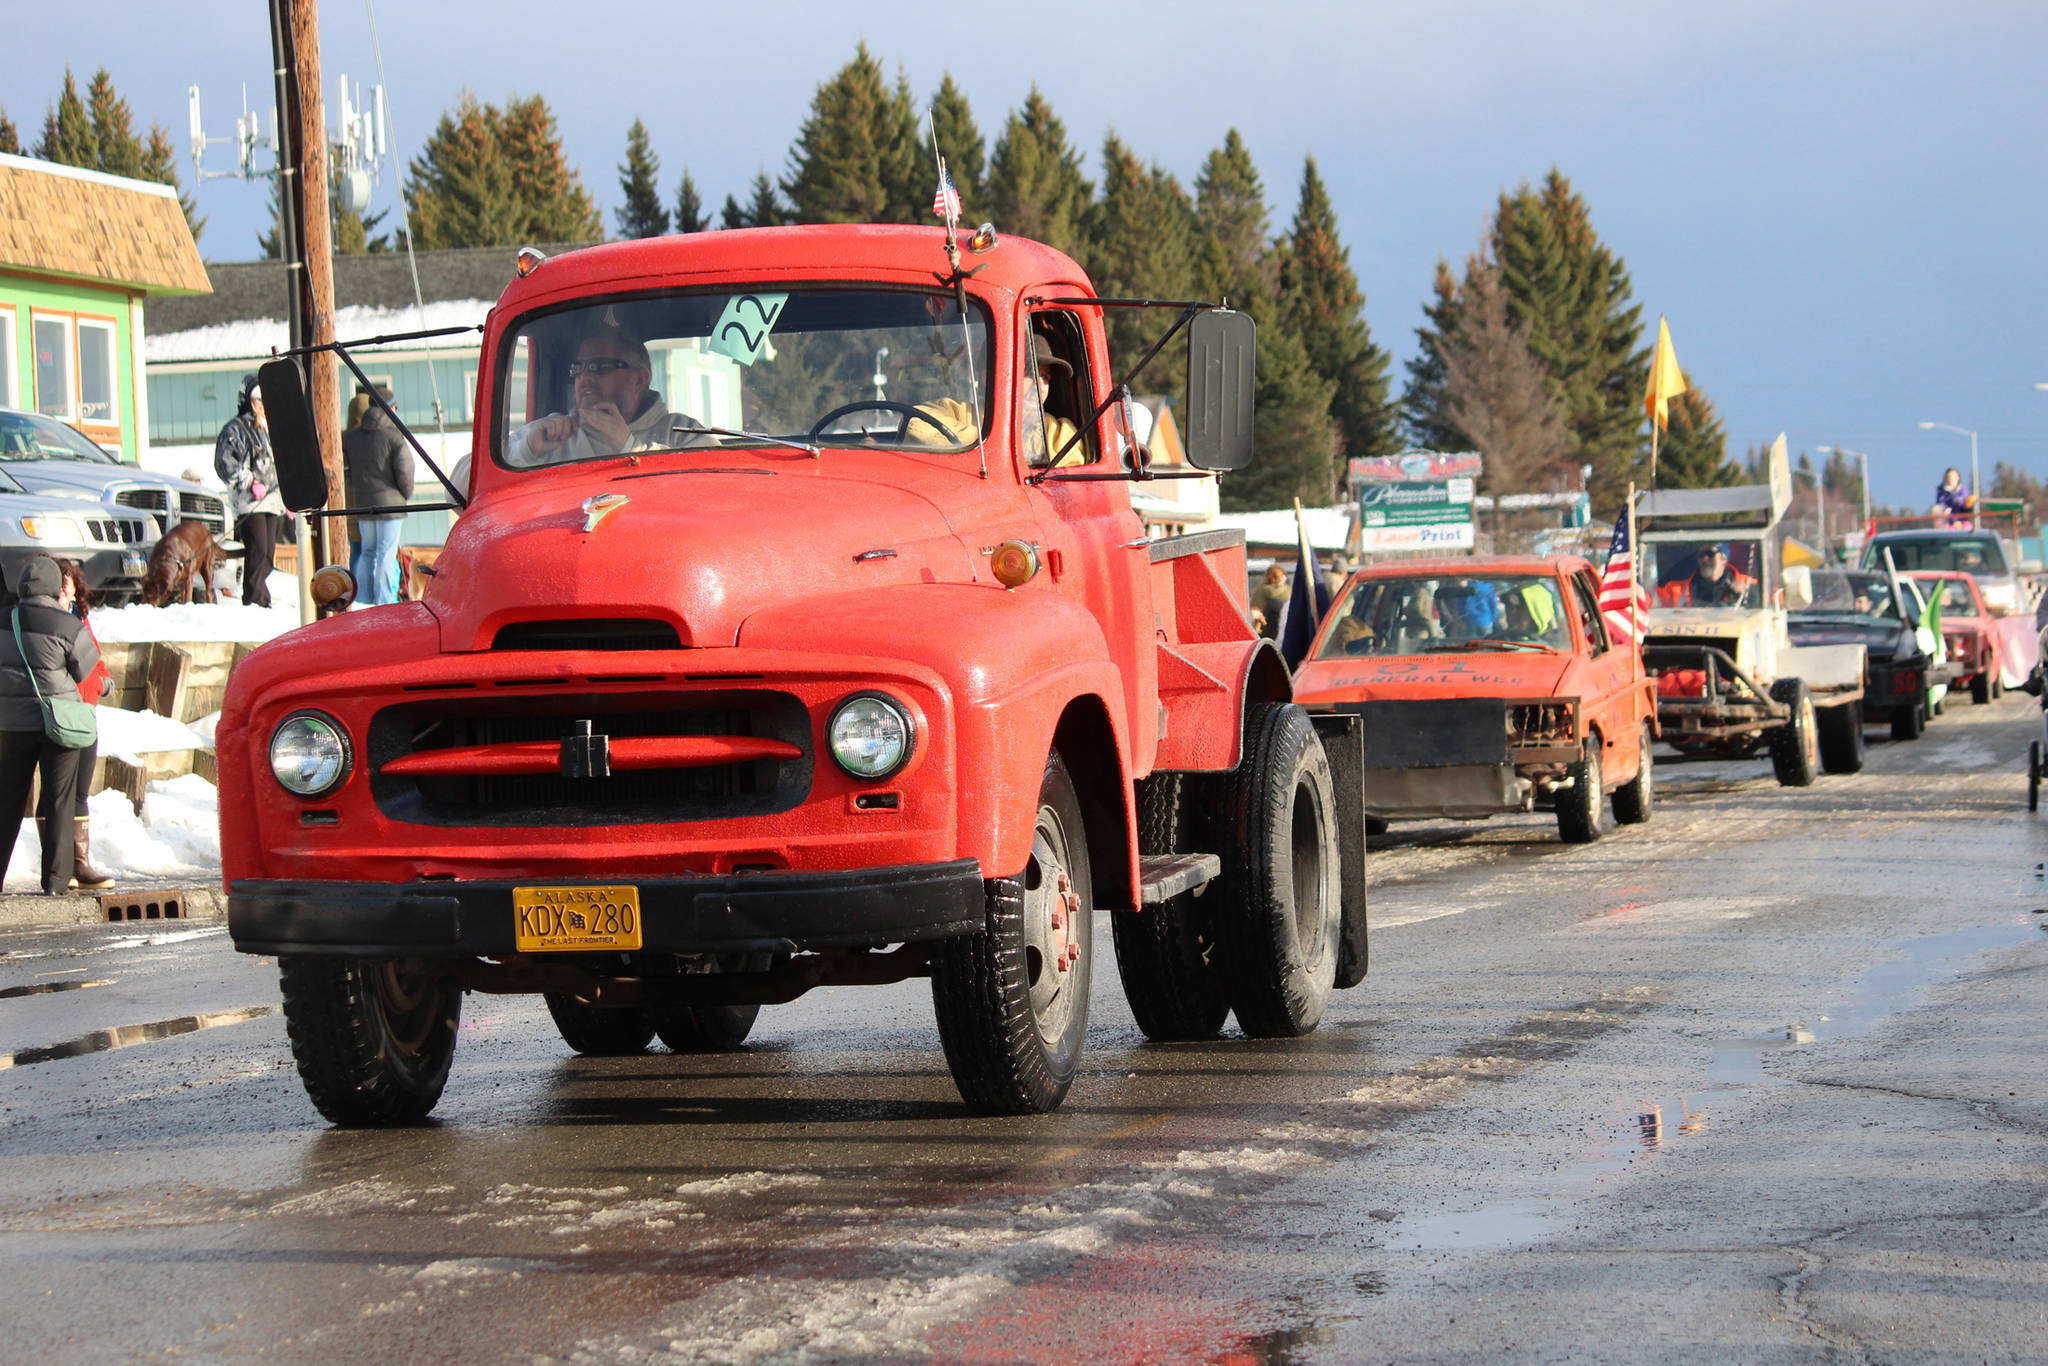 Classic and ice racing cars make their way down Pioneer Avenue during this year’s Homer Winter Carnival Parade on Saturday, Feb. 8, 2020 in Homer, Alaska. Ice races were held after the parade on Beluga Lake. (Photo by Megan Pacer/Homer News)